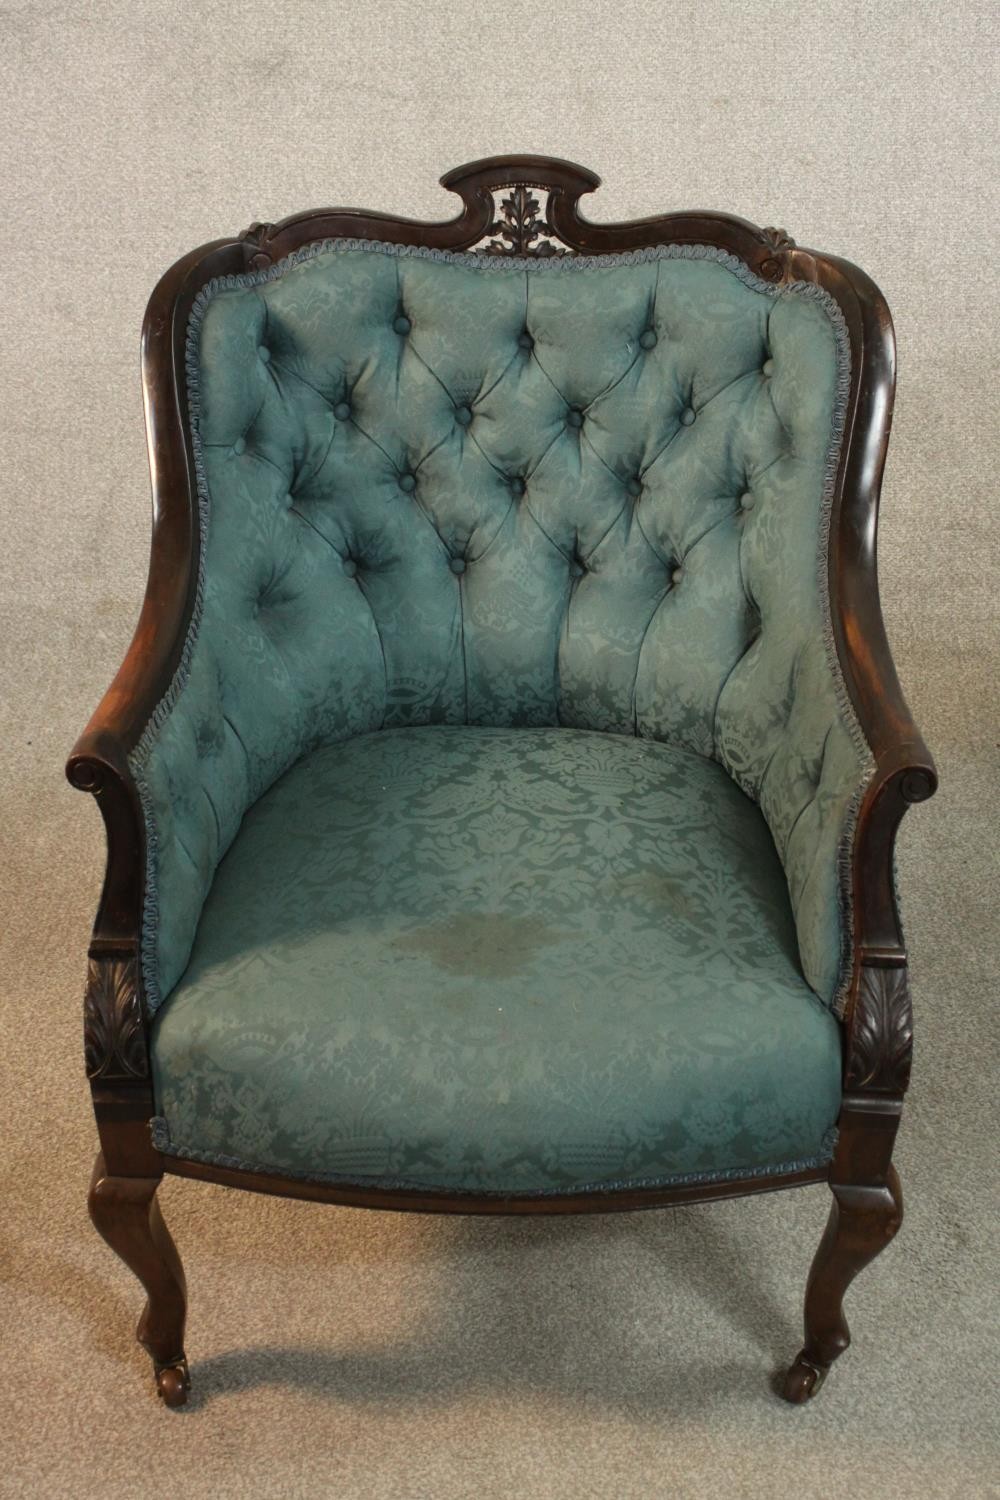 A pair of Edwardian walnut tub armchairs, upholstered in buttoned blue damask, with scrolling arms - Image 3 of 10